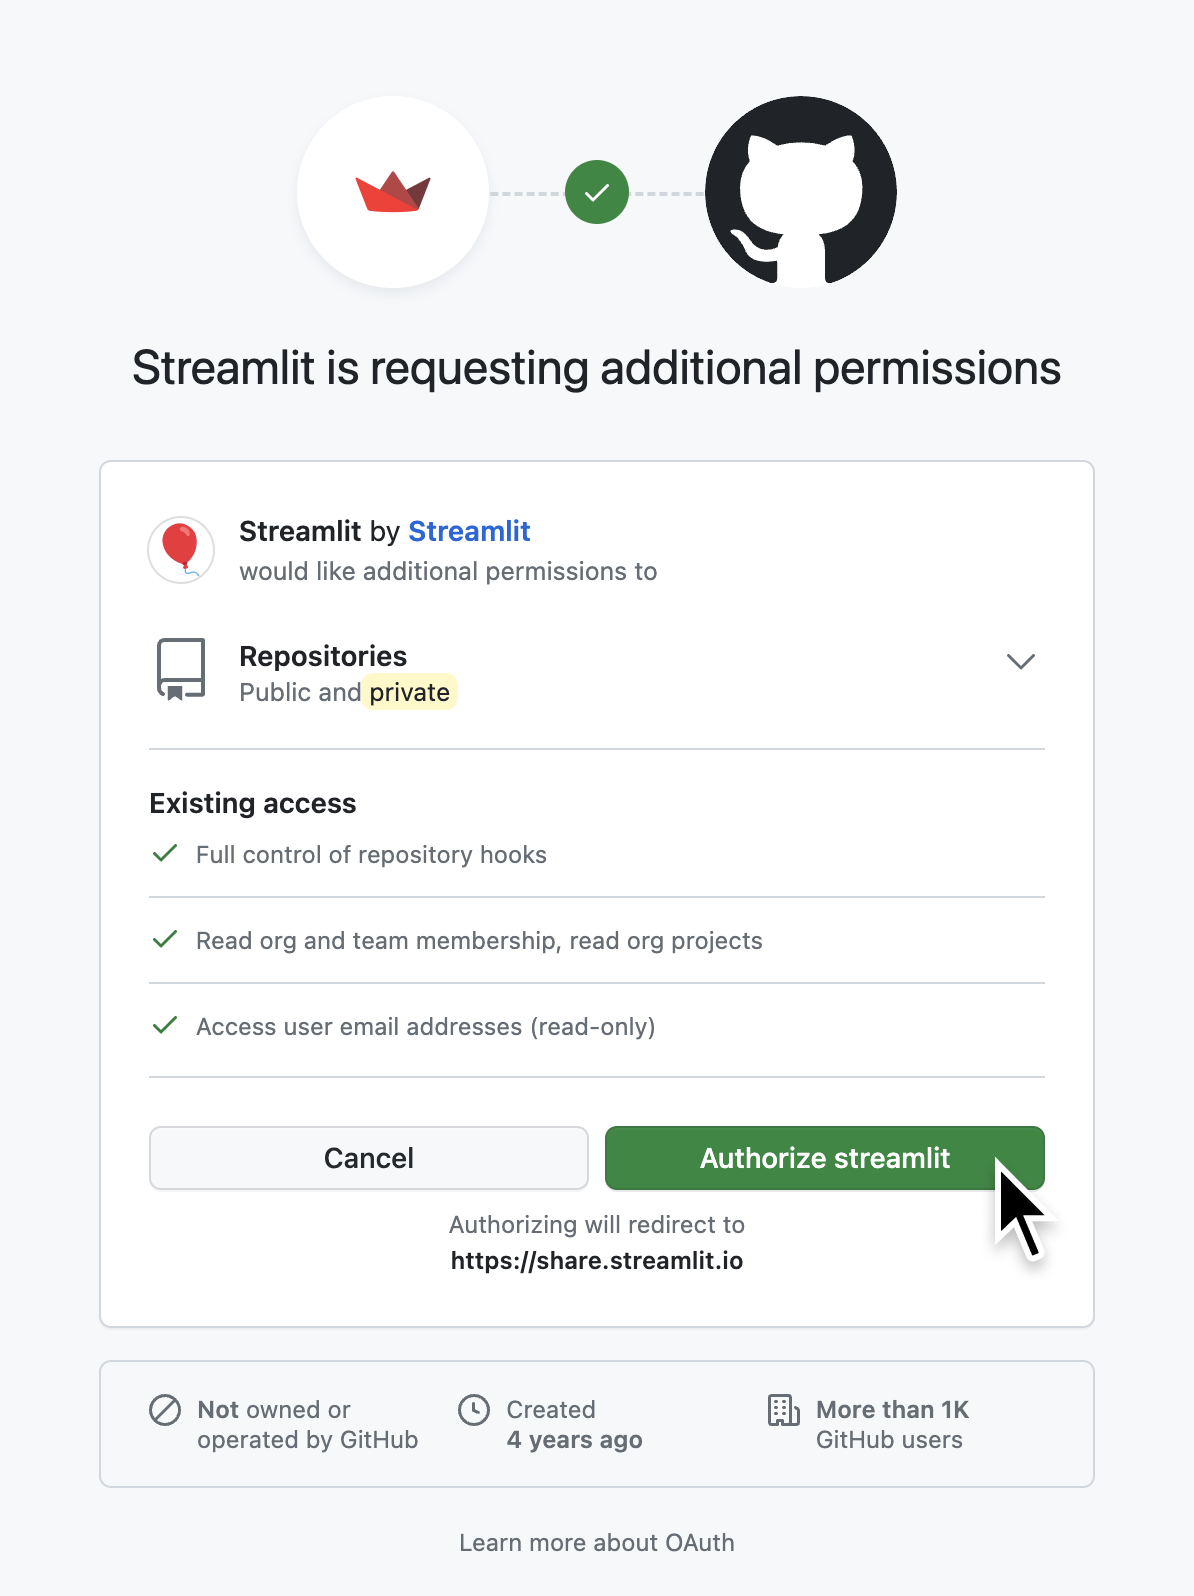 Authorize streamlit to access private repositories